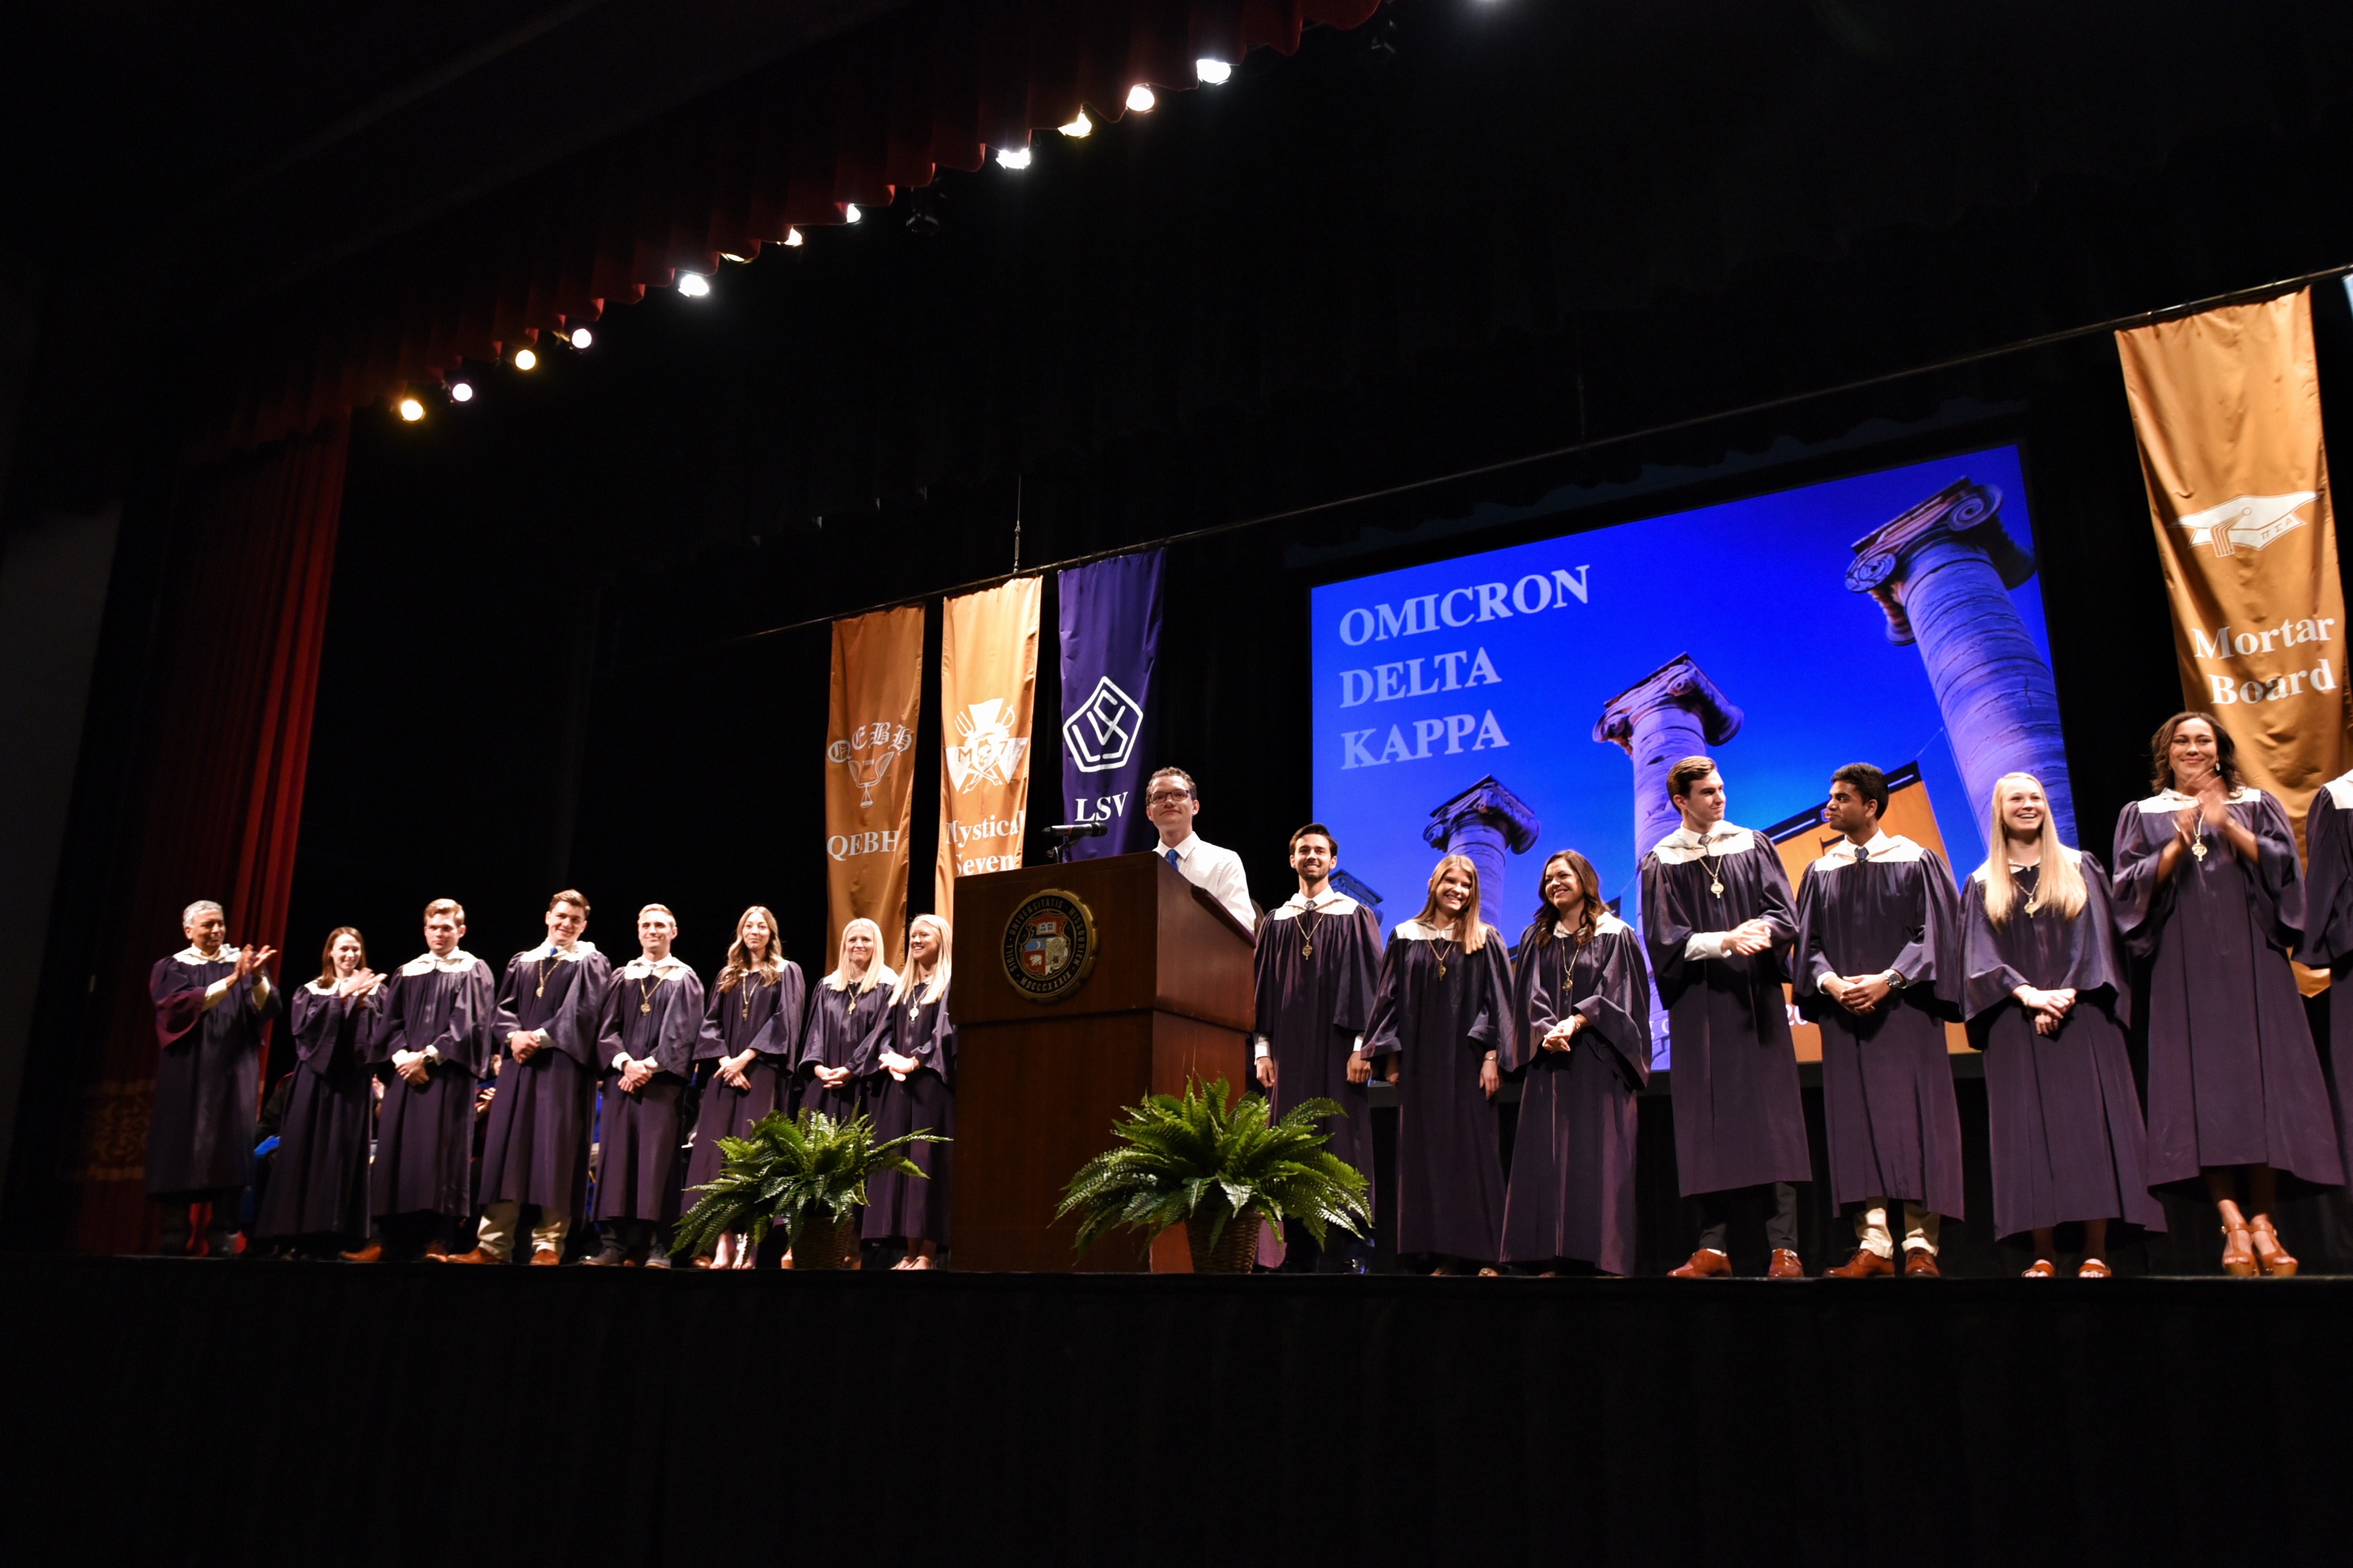 New members of Omicron Delta Kappa, wearing blue robes, are unveiled.